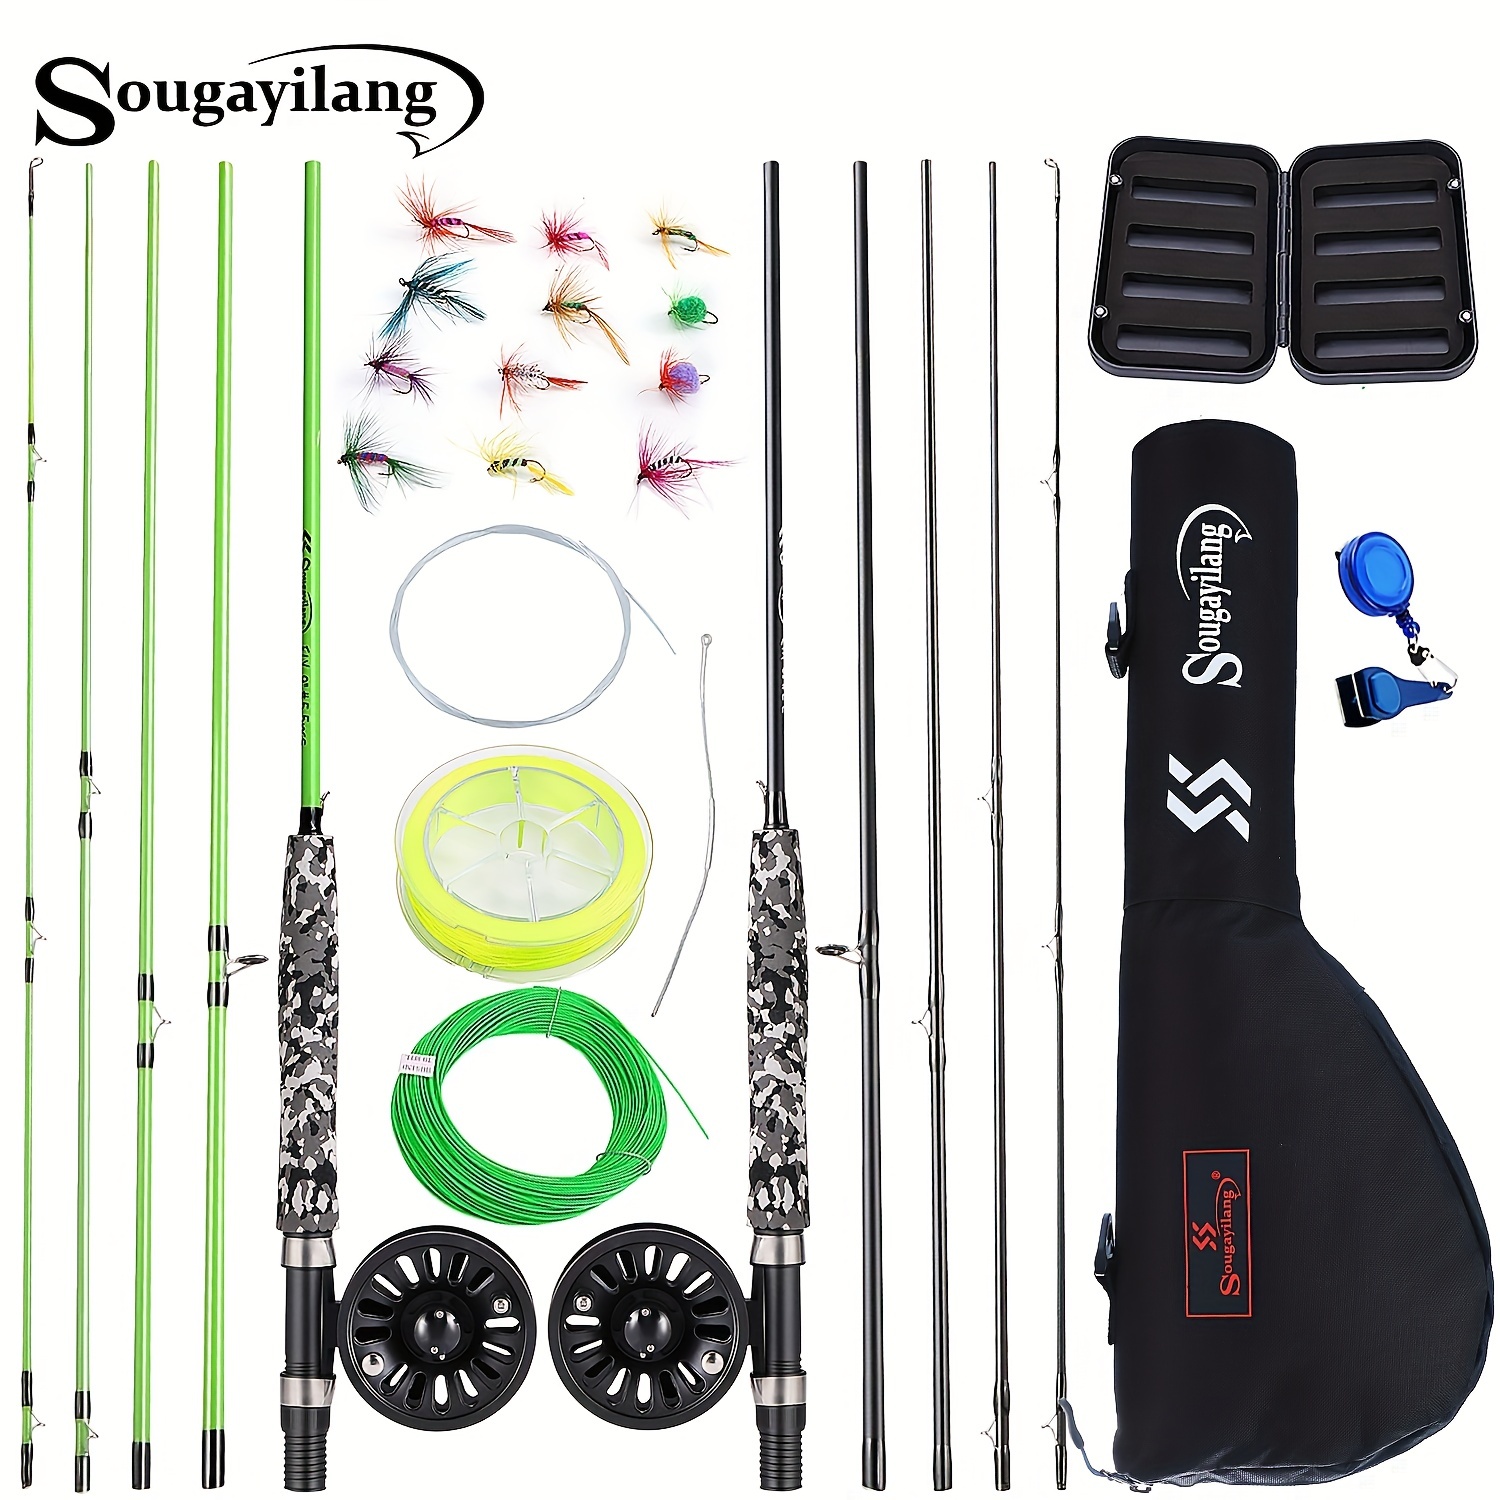 Sougayilang Fishing Rod Reel Combos Kit, Including High Carbon Fishing  Pole, Black Smooth Fishing Reel, Artificial * Bait, Fishing Line And More